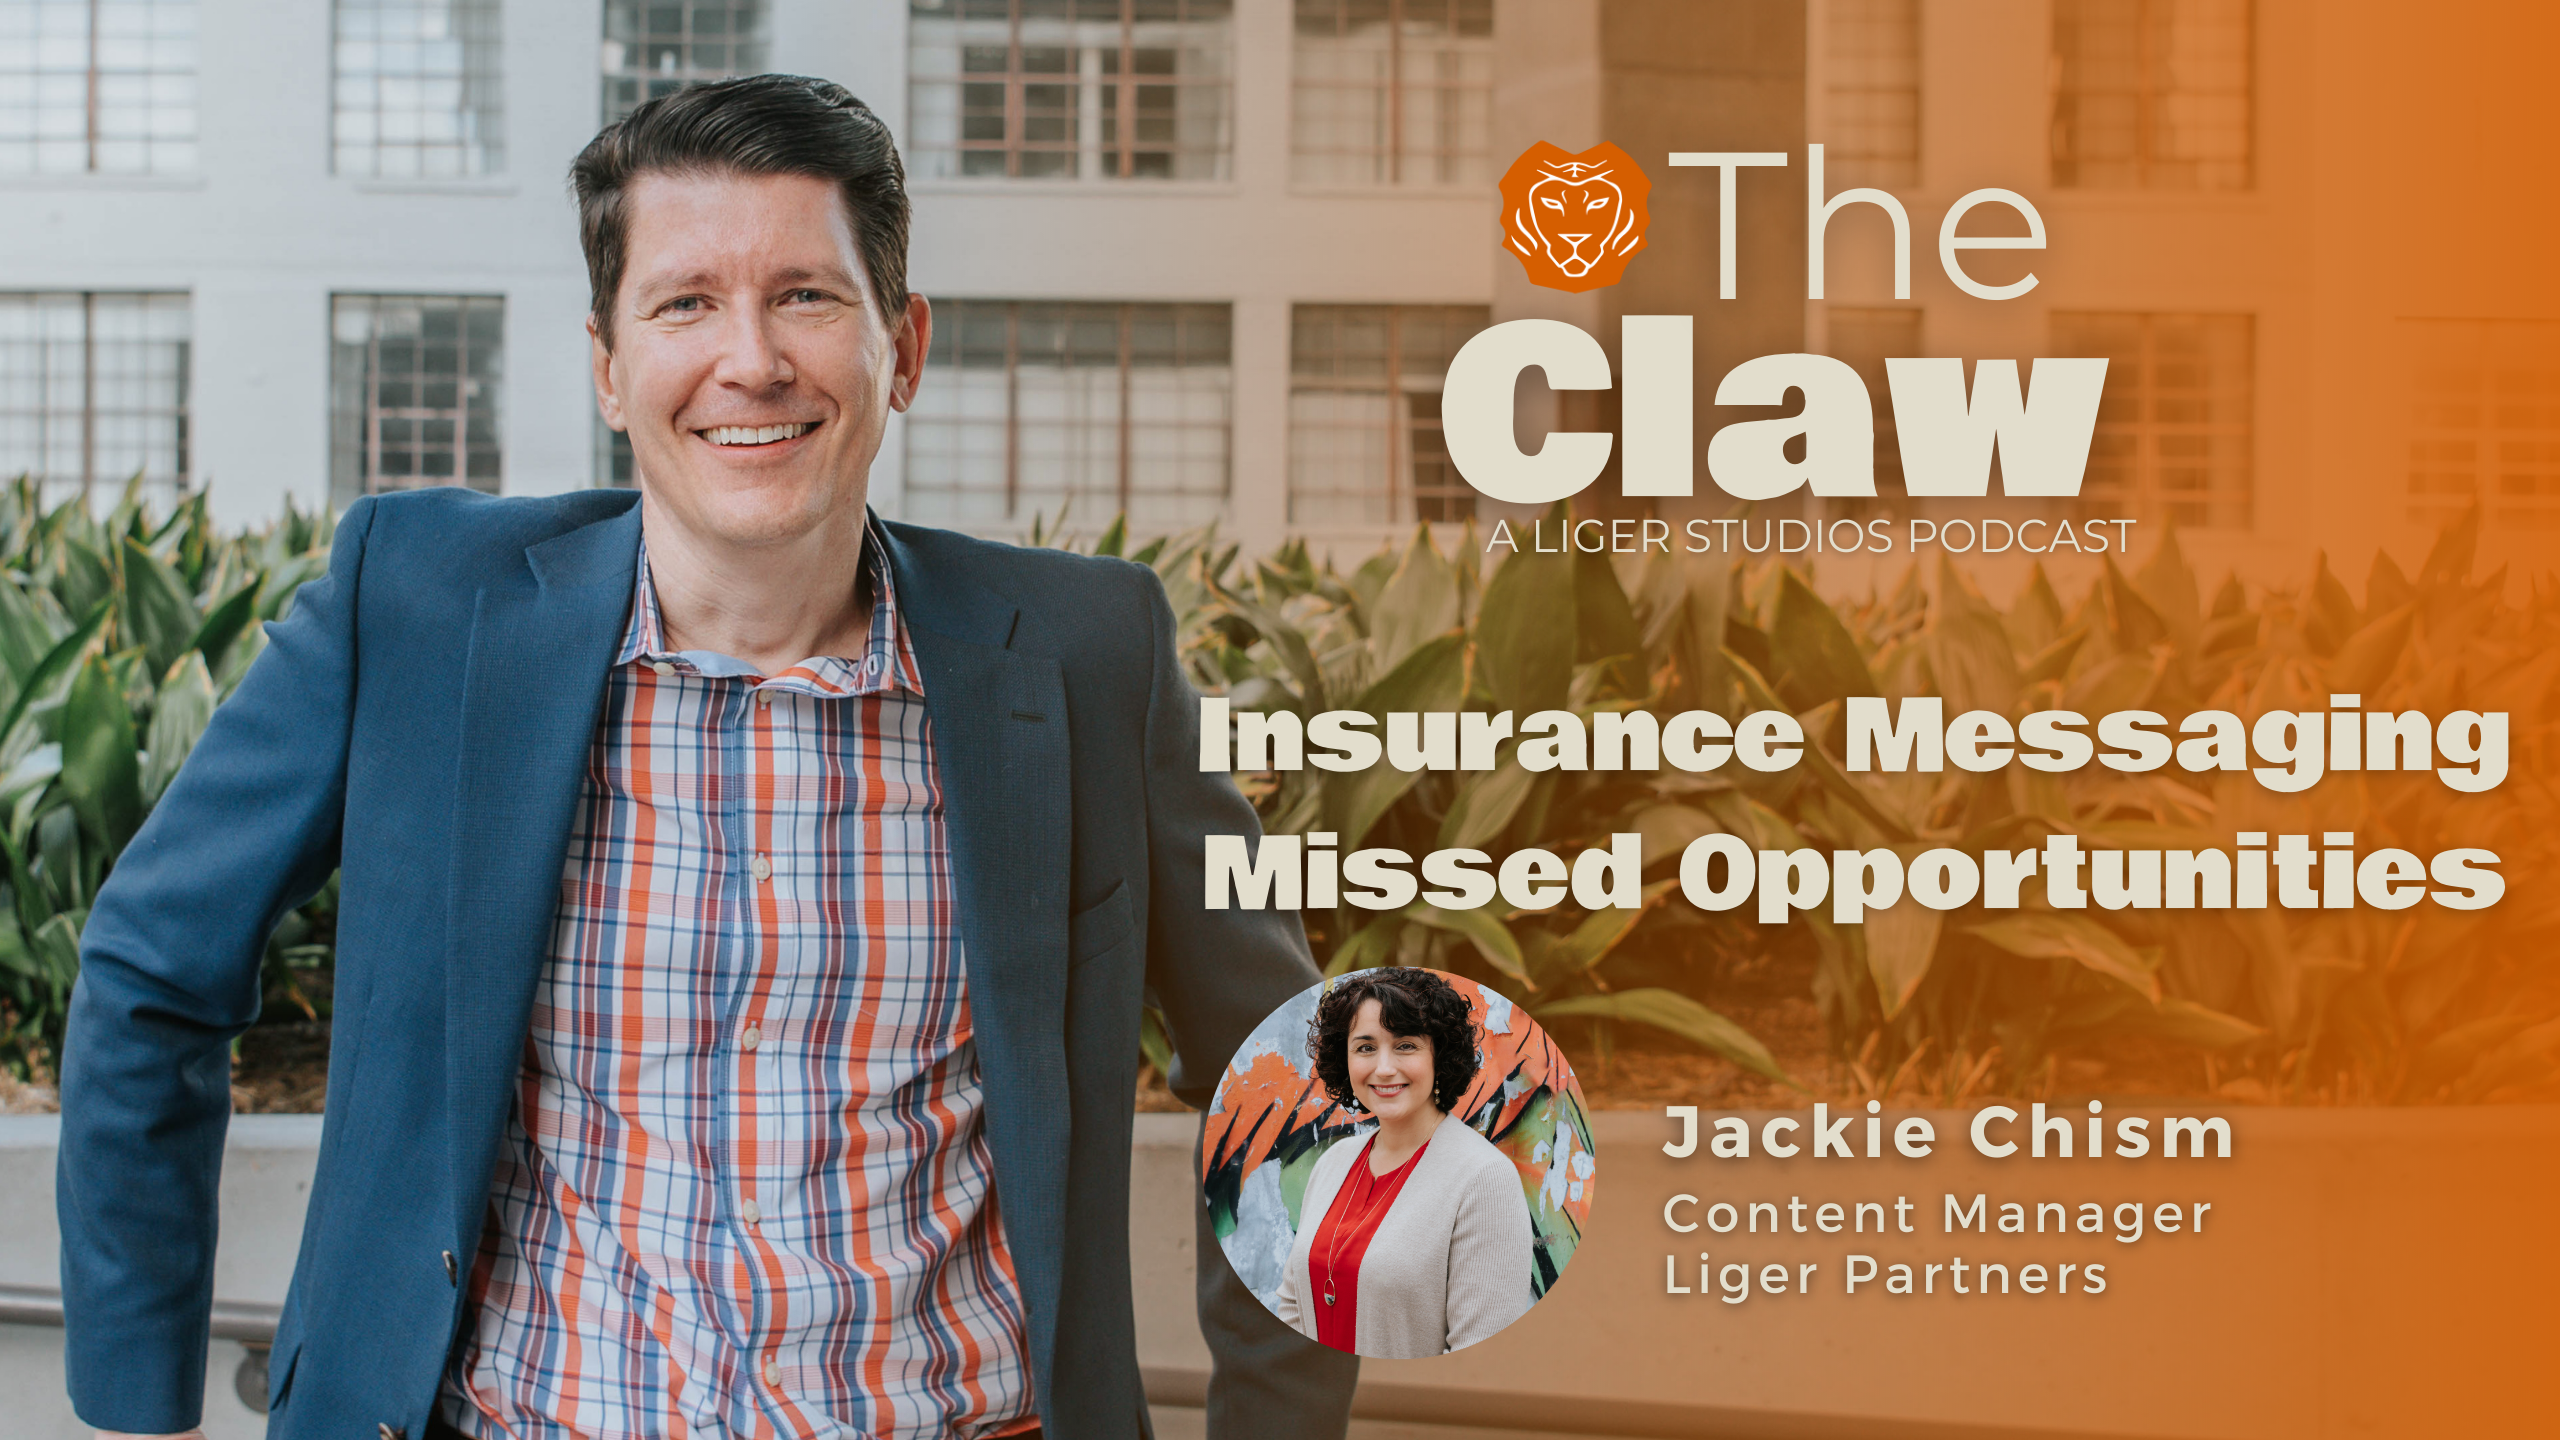 The Claw Podcast: Insurance Messaging Missed Opportunities With Jackie Chism